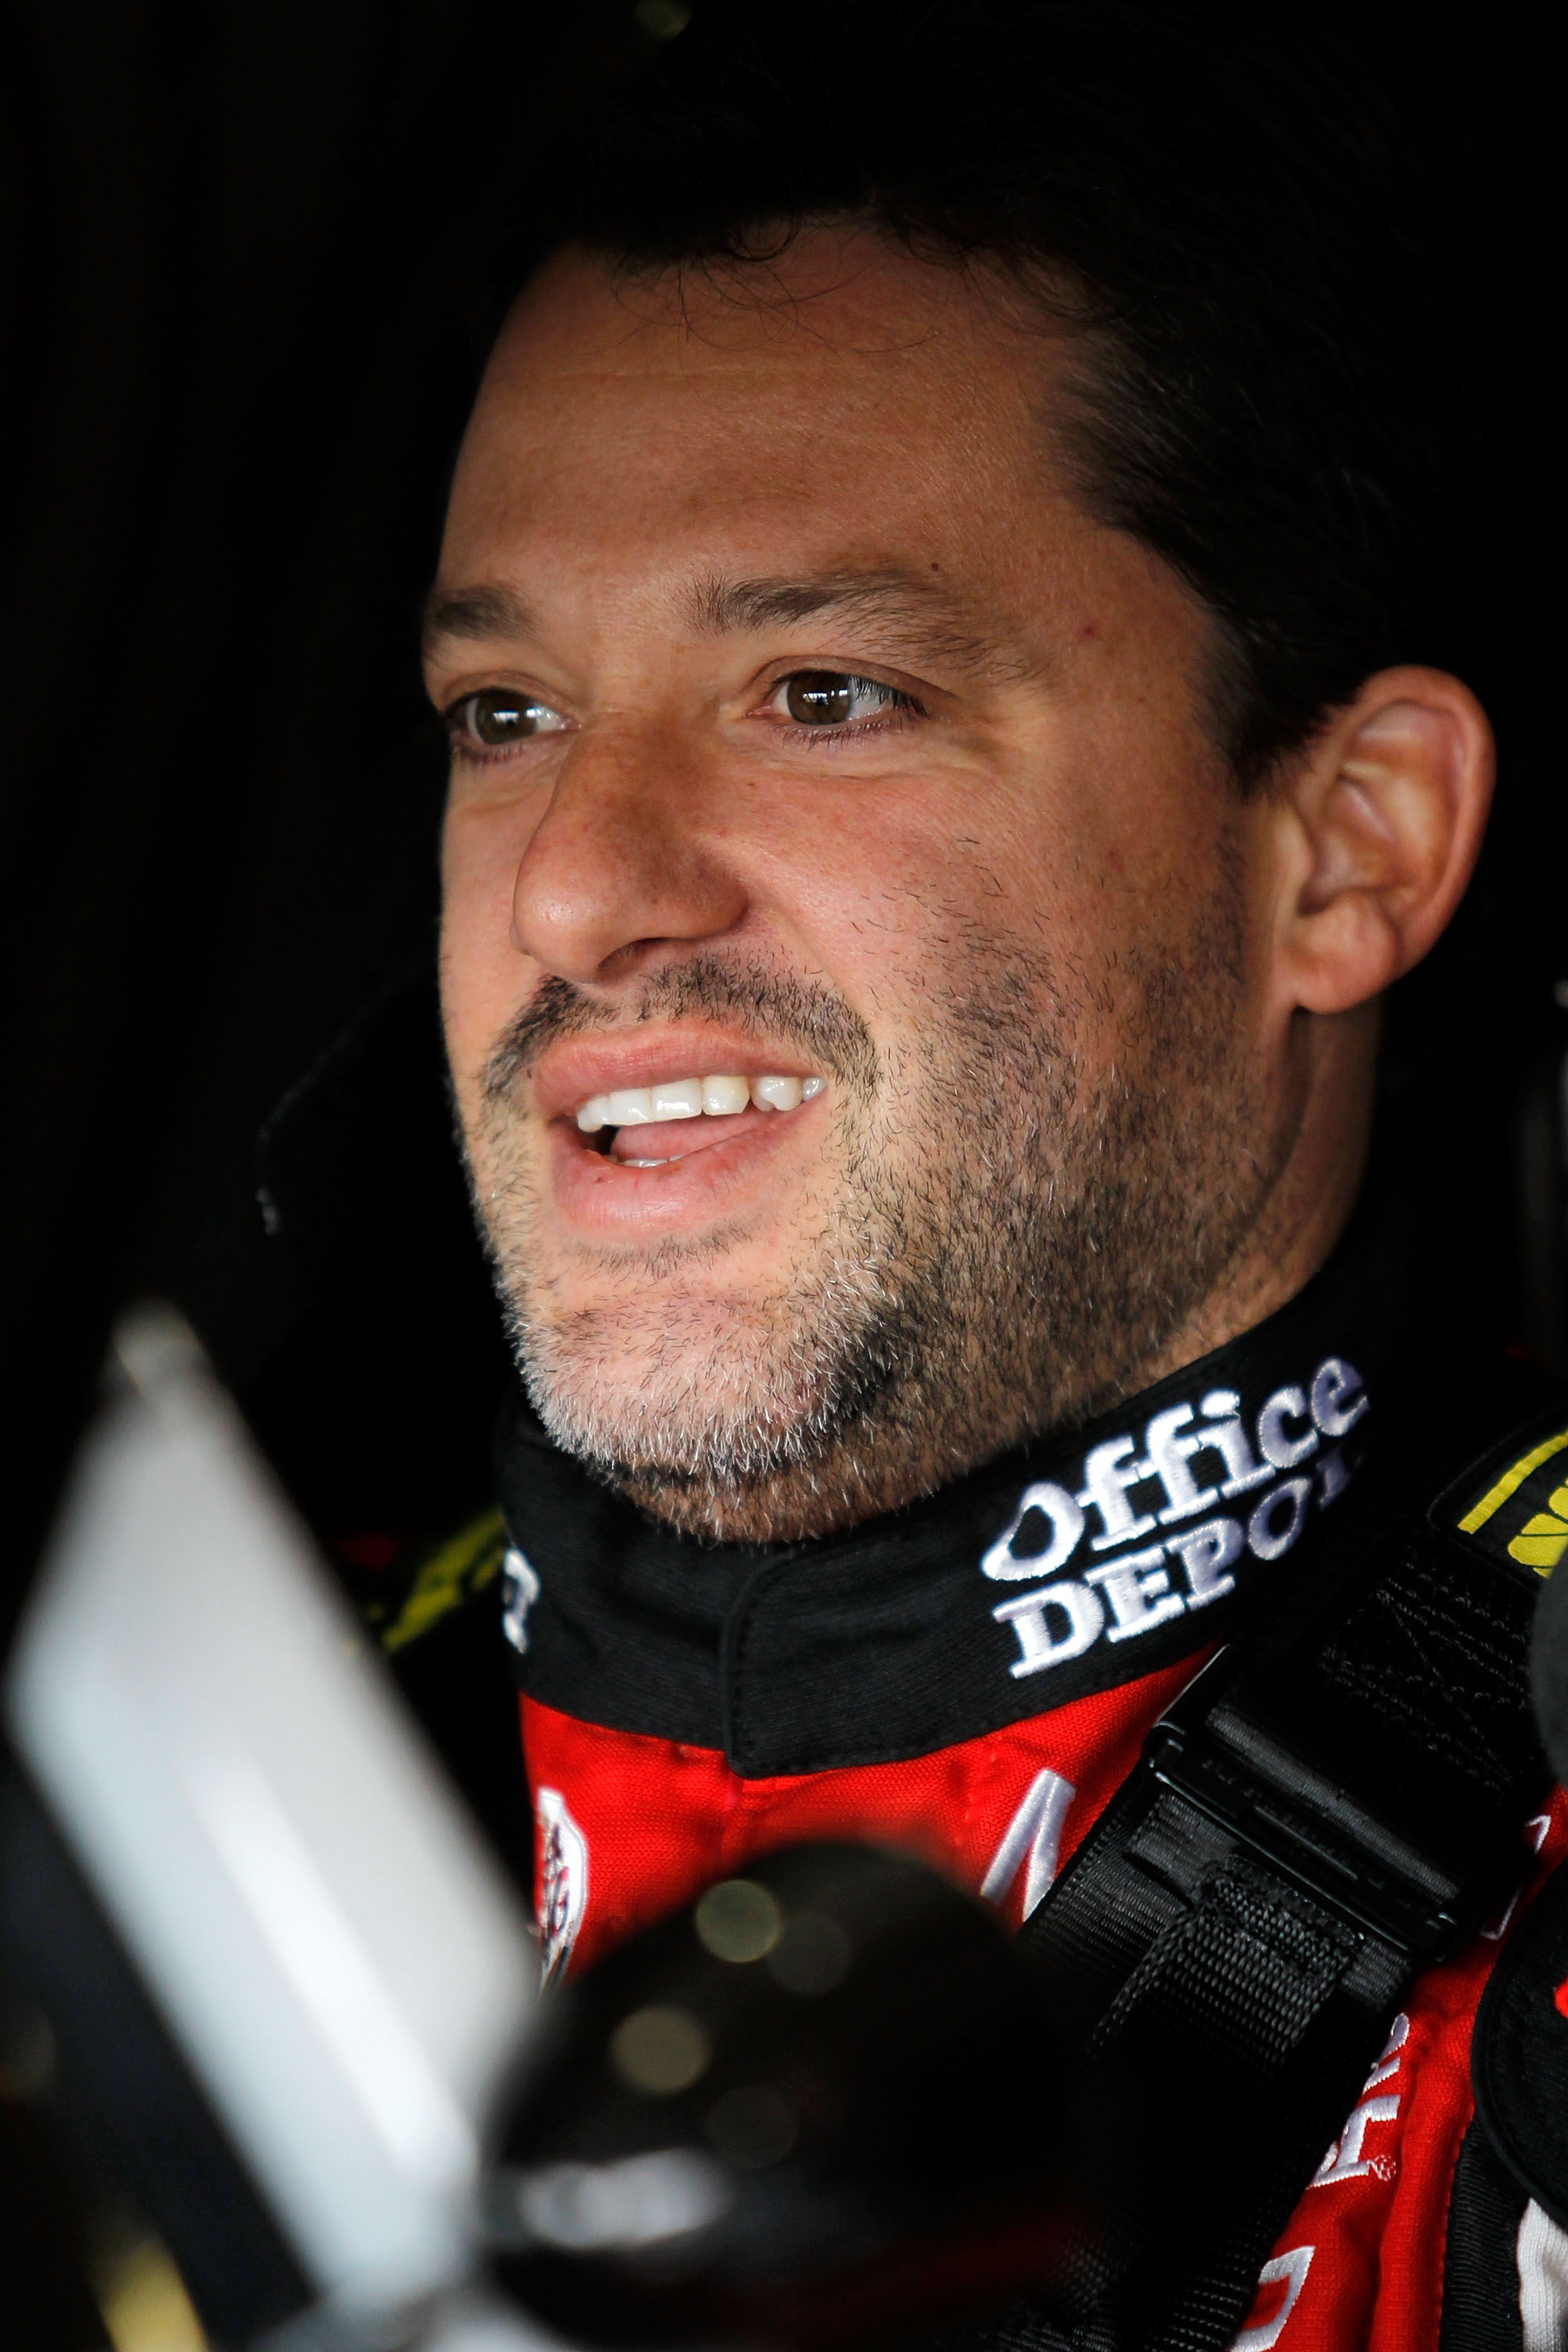 FONTANA, CA - MARCH 26:  Tony Stewart, driver of the #14 Office Depot/Mobil 1 Chevrolet, sits in his car during practice for the NASCAR Sprint Cup Series Auto Club 400 at Auto Club Speedway on March 26, 2011 in Fontana, California.  (Photo by Todd Warshaw